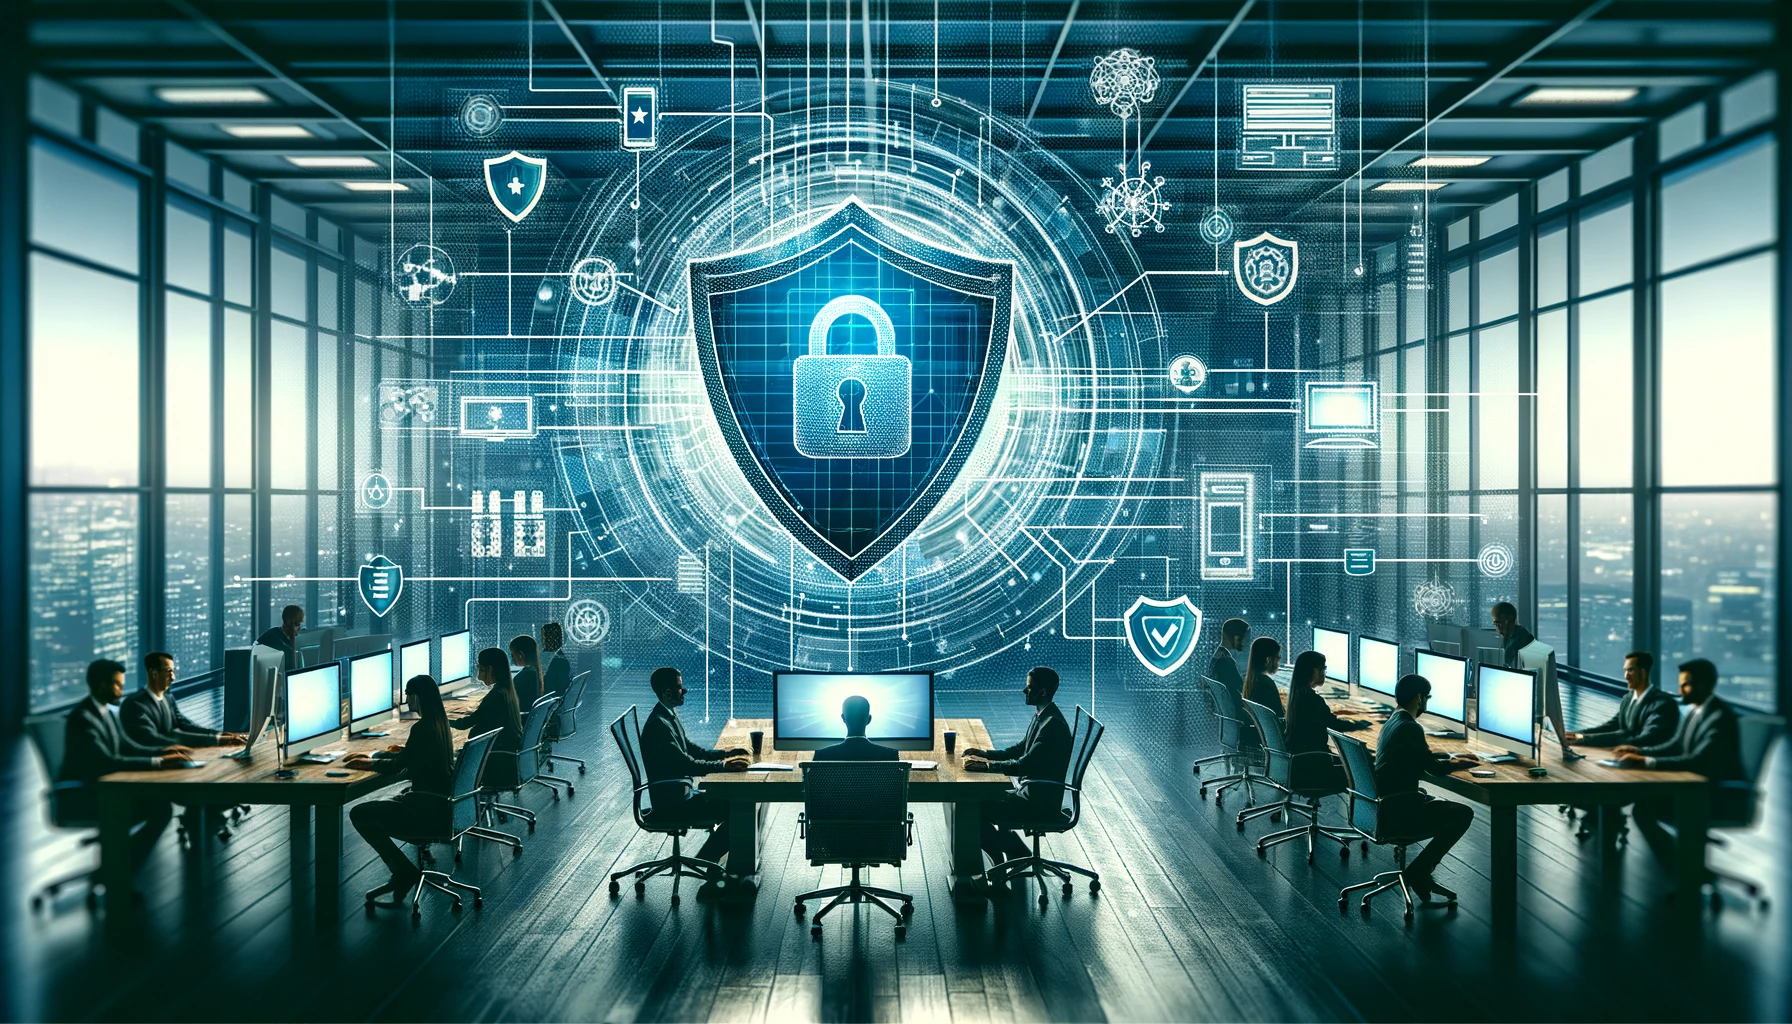 The image designed captures the essence of cybersecurity within a corporate setting, featuring a symbolic shield overlaying a network of connected devices, set against the backdrop of a modern office environment, and emphasizing protection and safety in the digital realm.